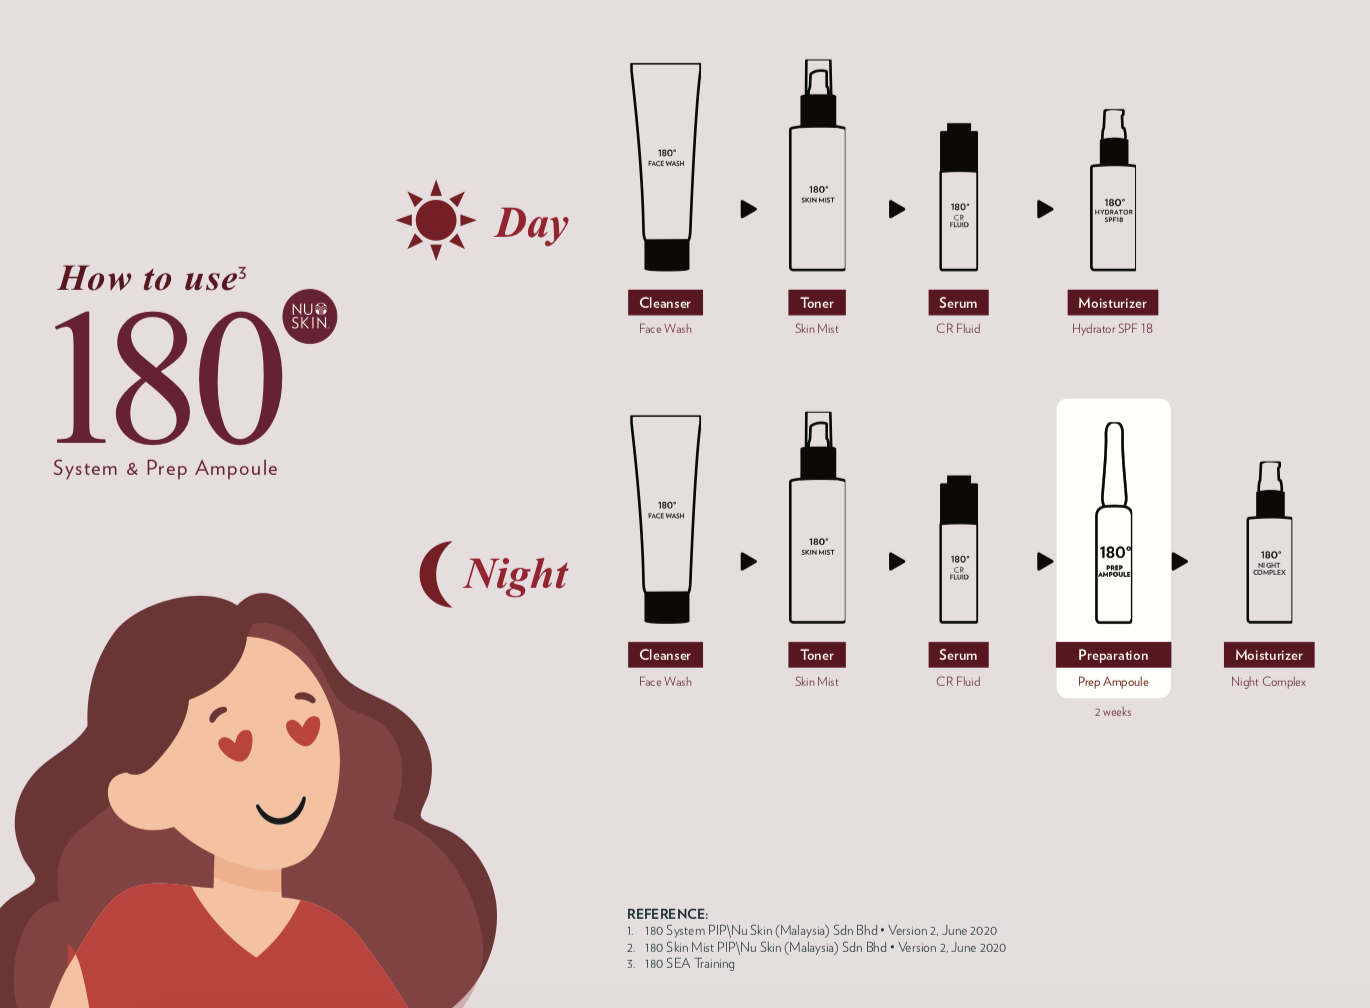 How to use Nu Skin 180°® Miraculous Prep Ampoule